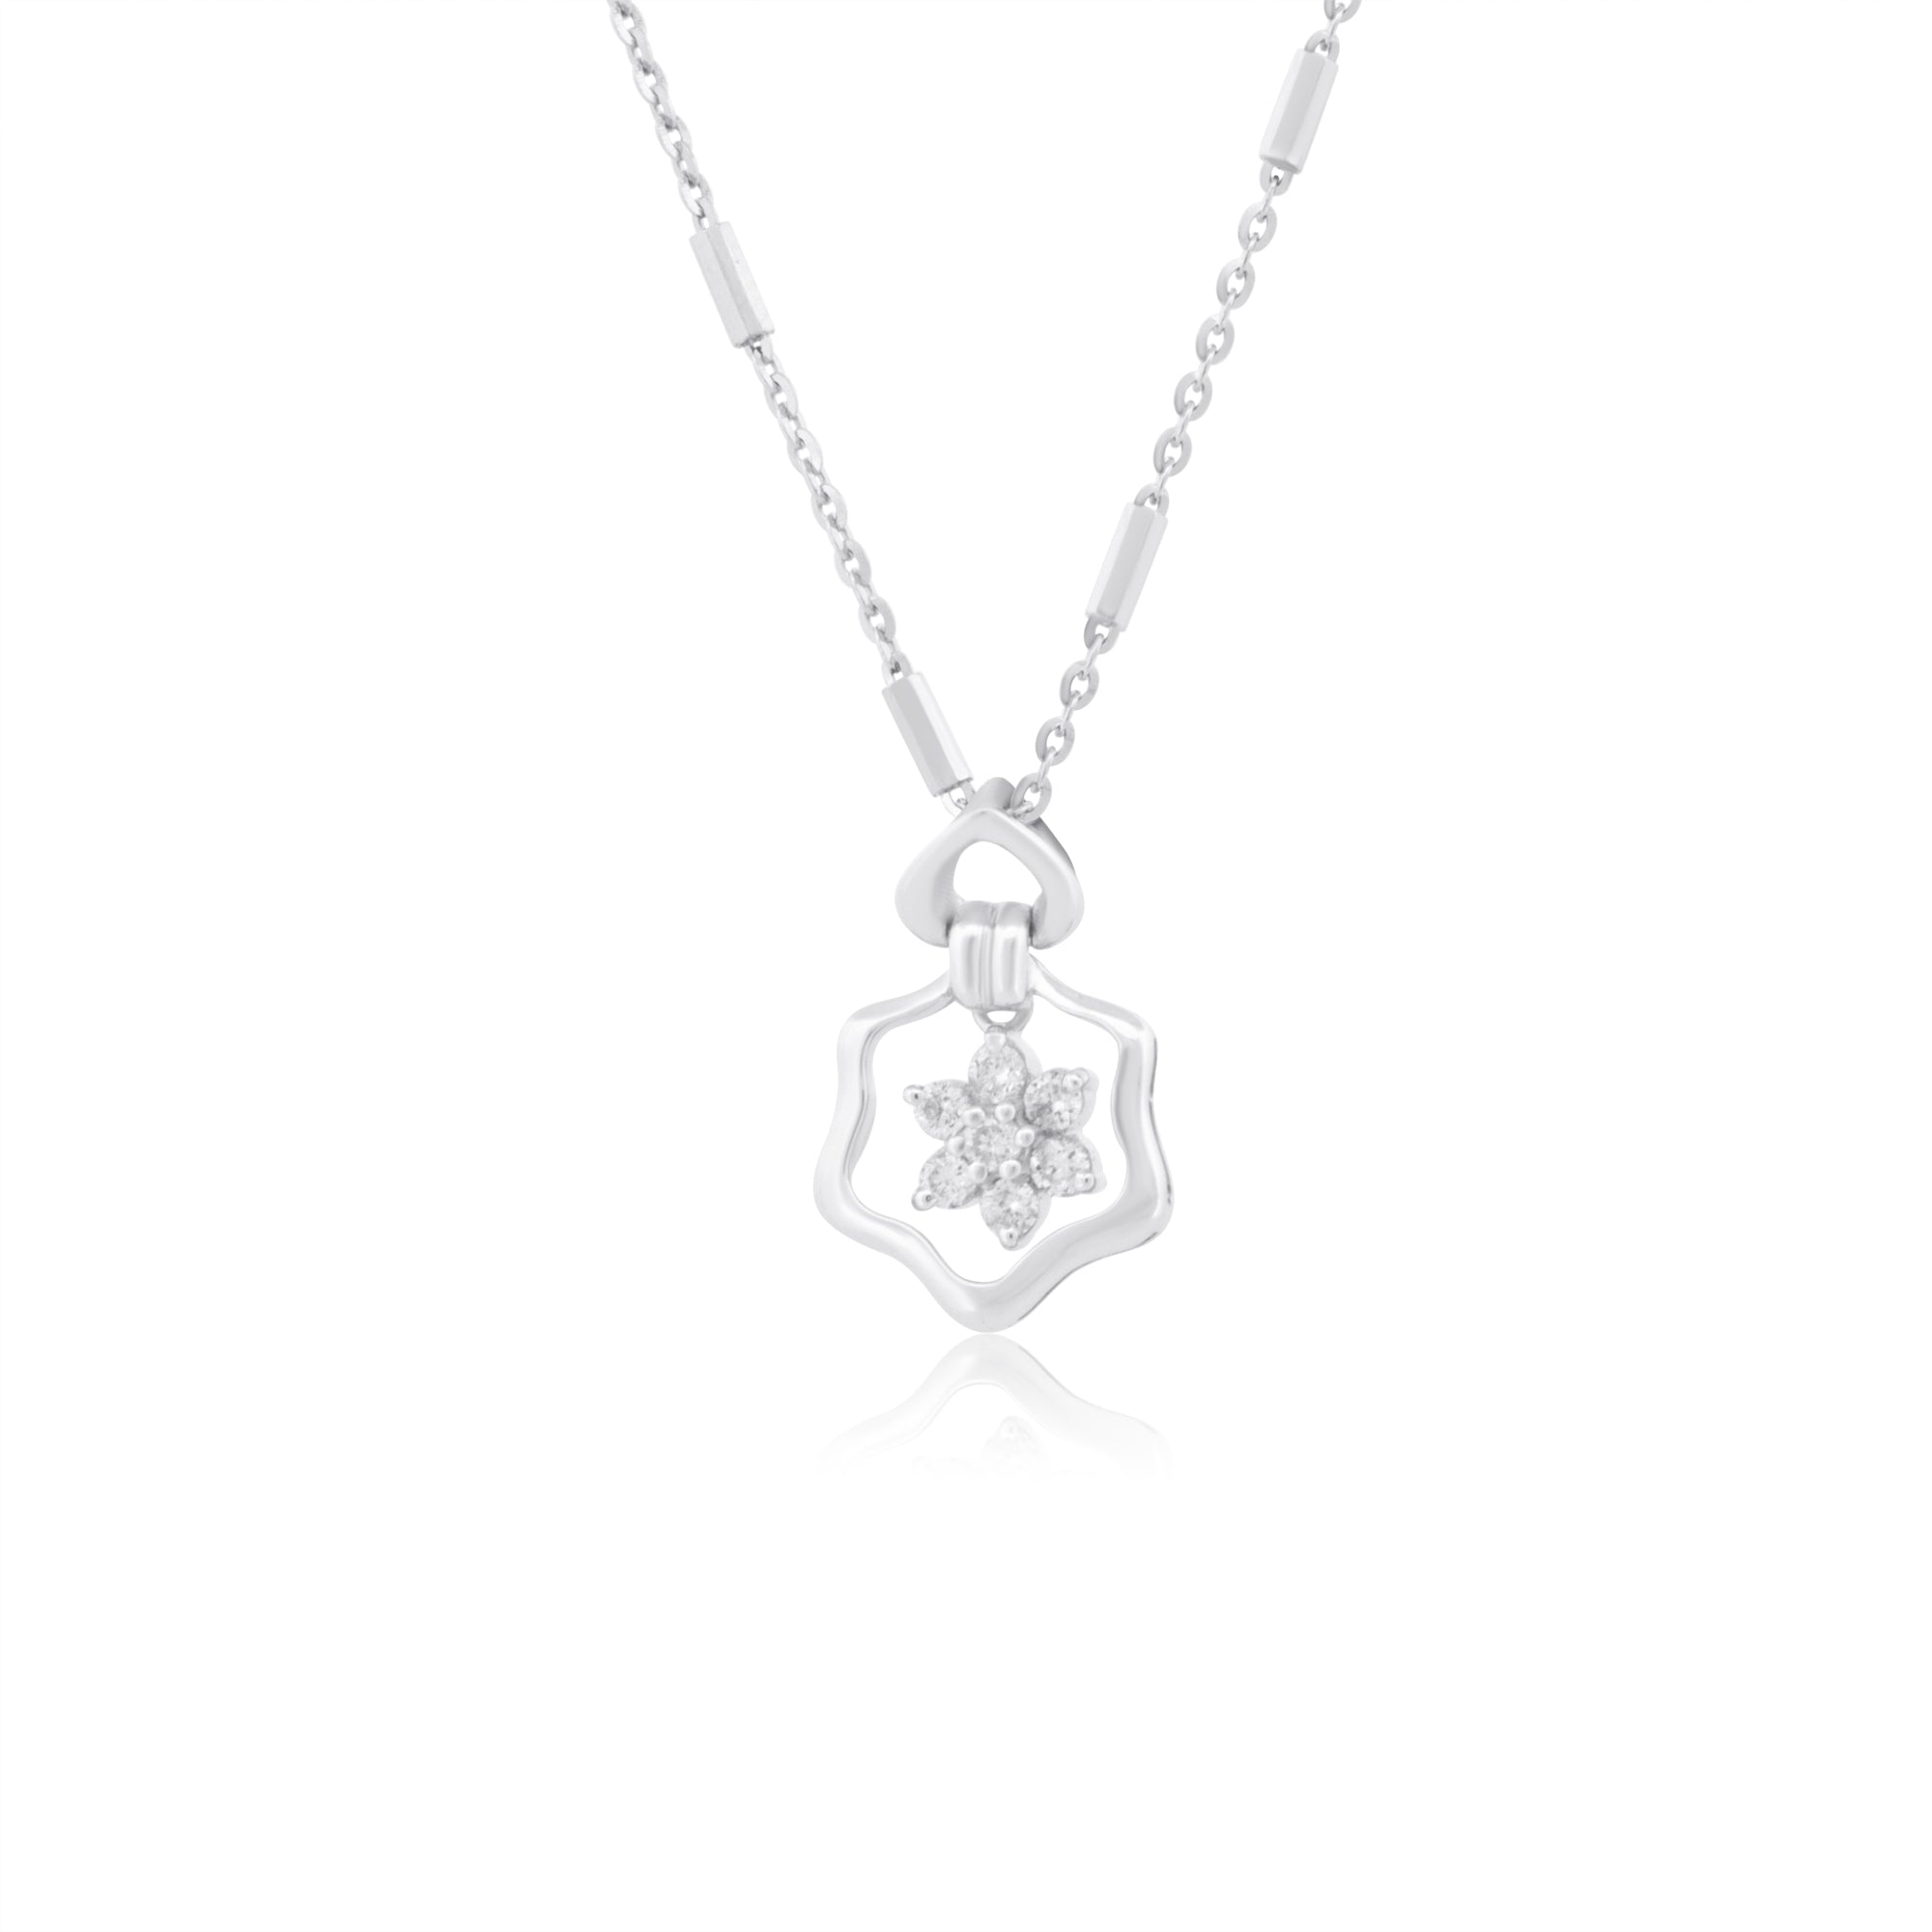 14k White Gold with 0.16Ctw White Diamond Flower Dangle Necklace